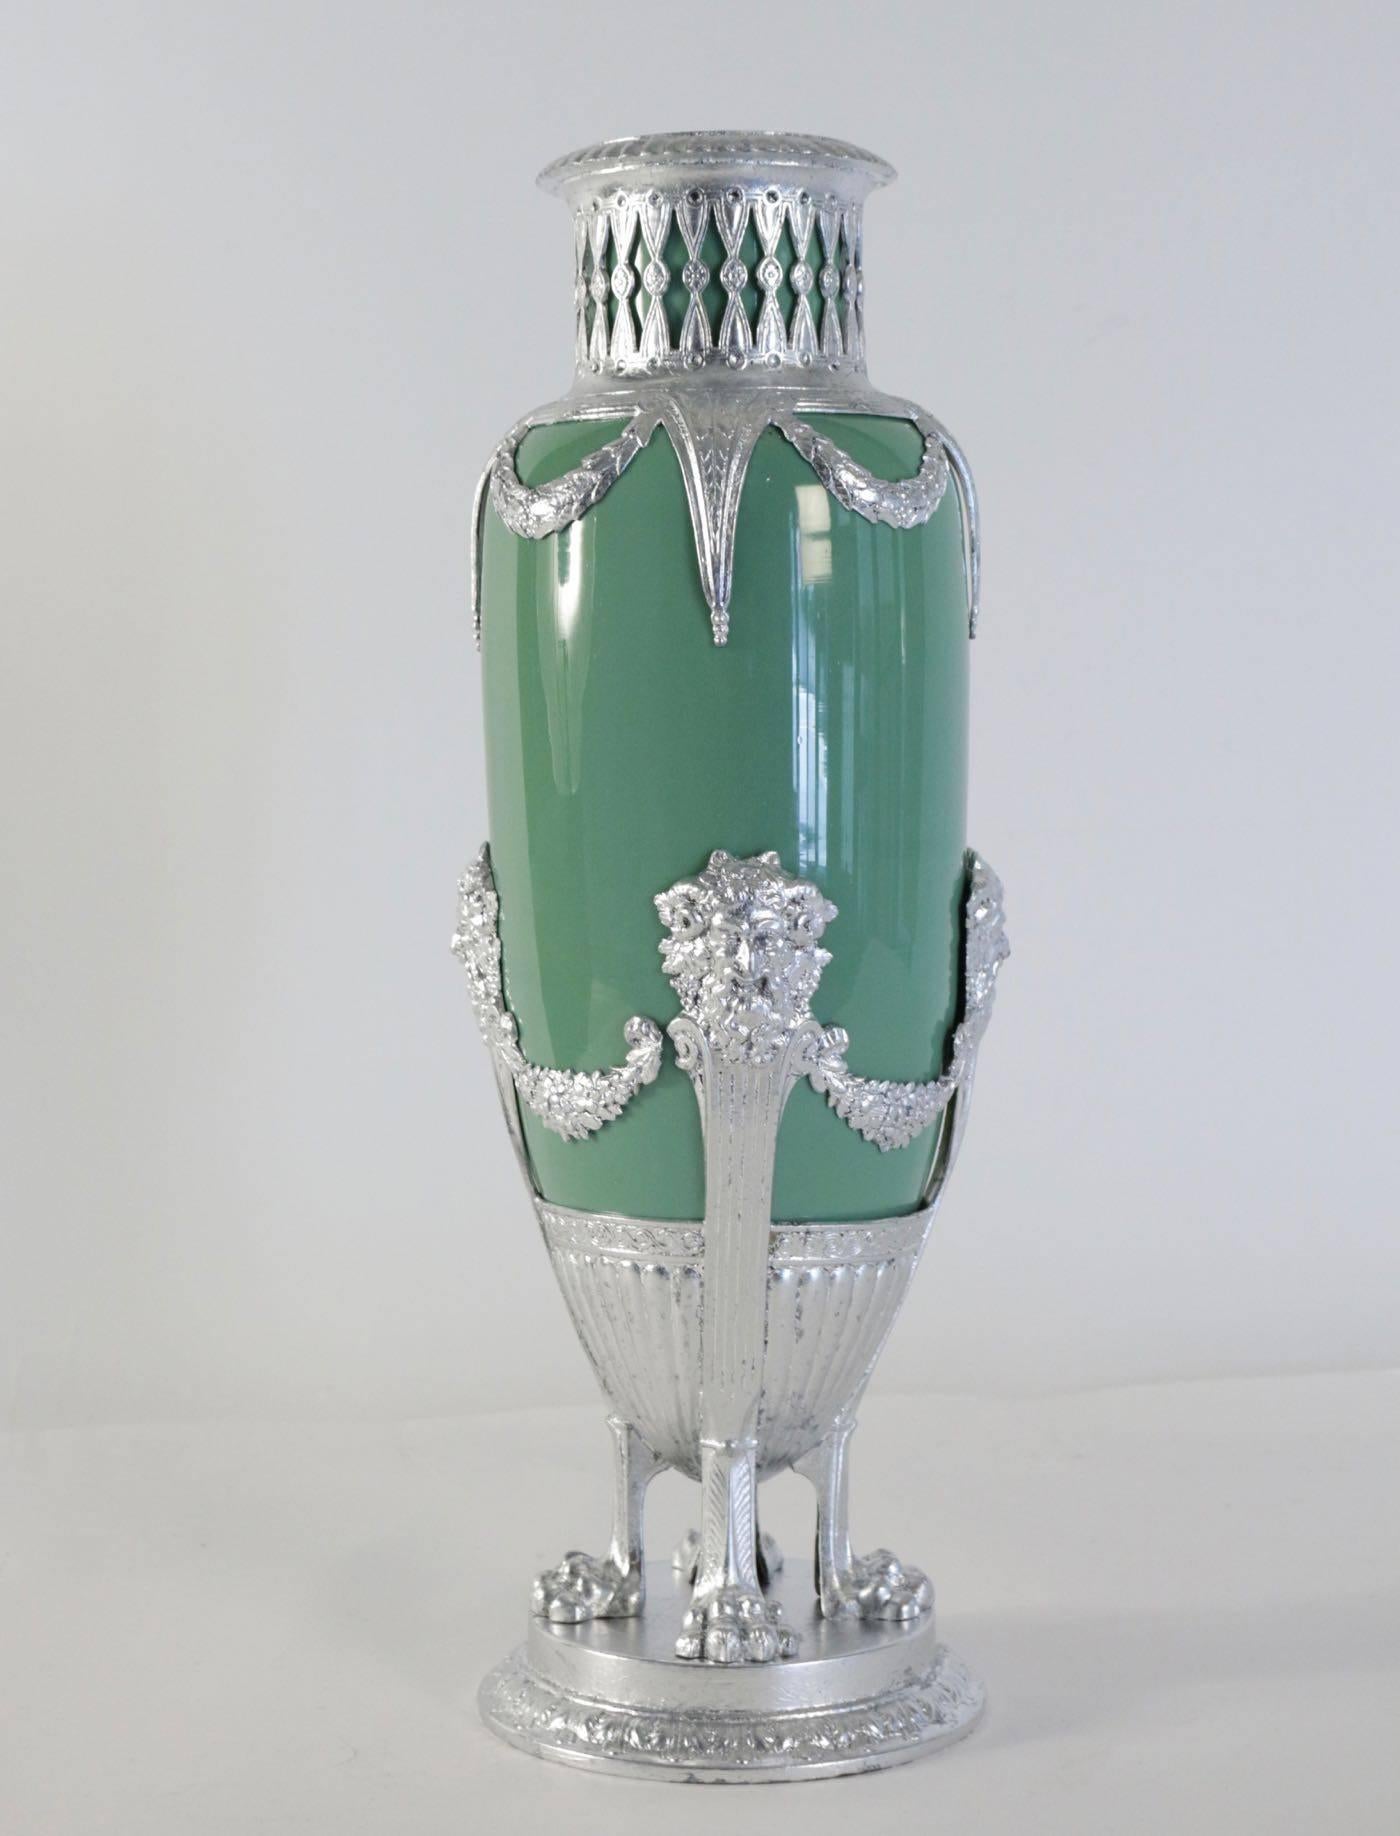 Celadon vase in faience with silver plate and silver leaf, 19th century period Napoleon III.
 